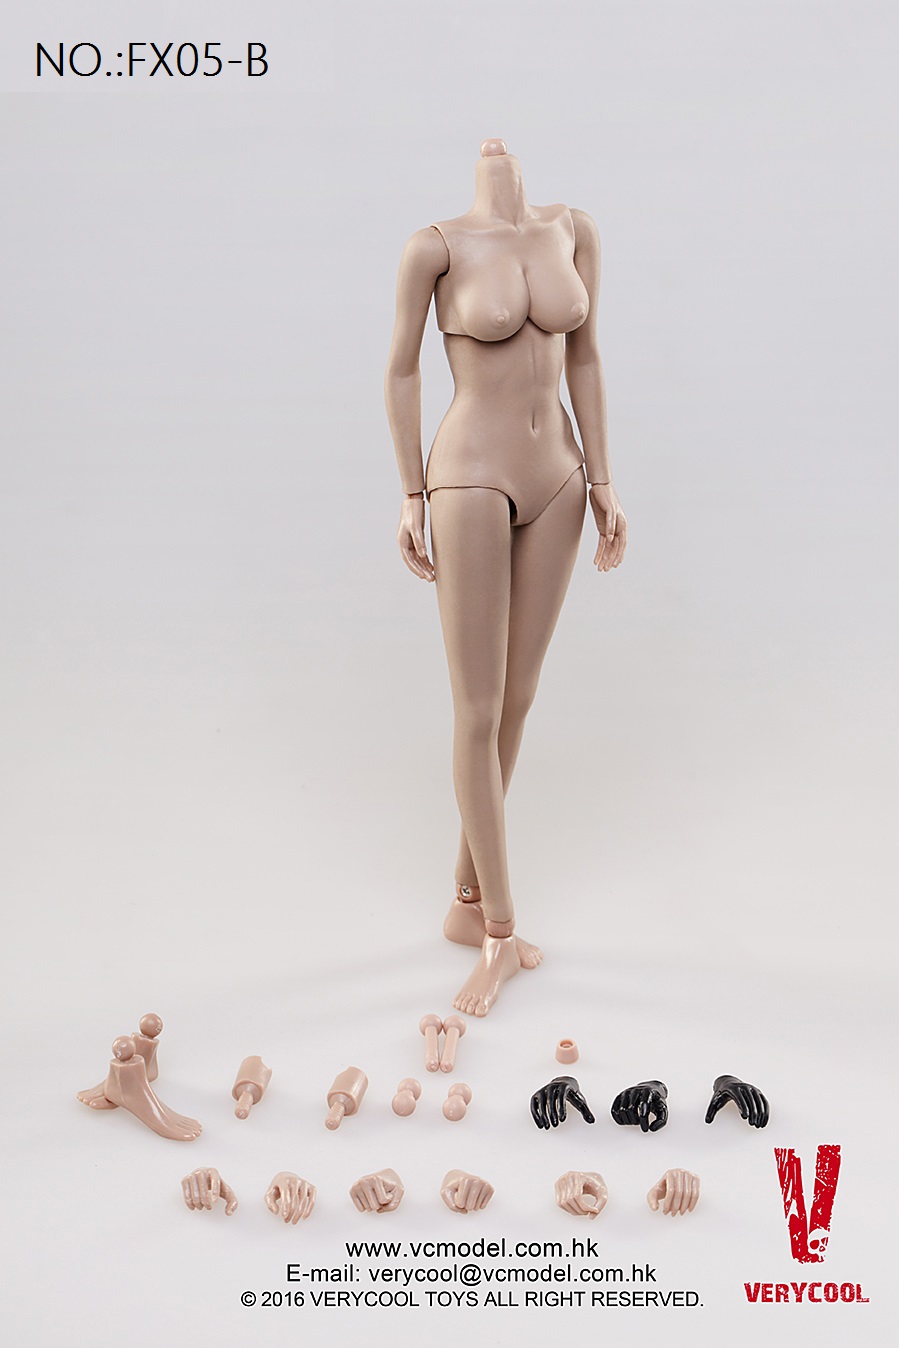 rubberjoint - NEW PRODUCT: [head carving / body] VERYCOOL notice: 1/6 FX05 joint rubber female body COMING SOON 17190710